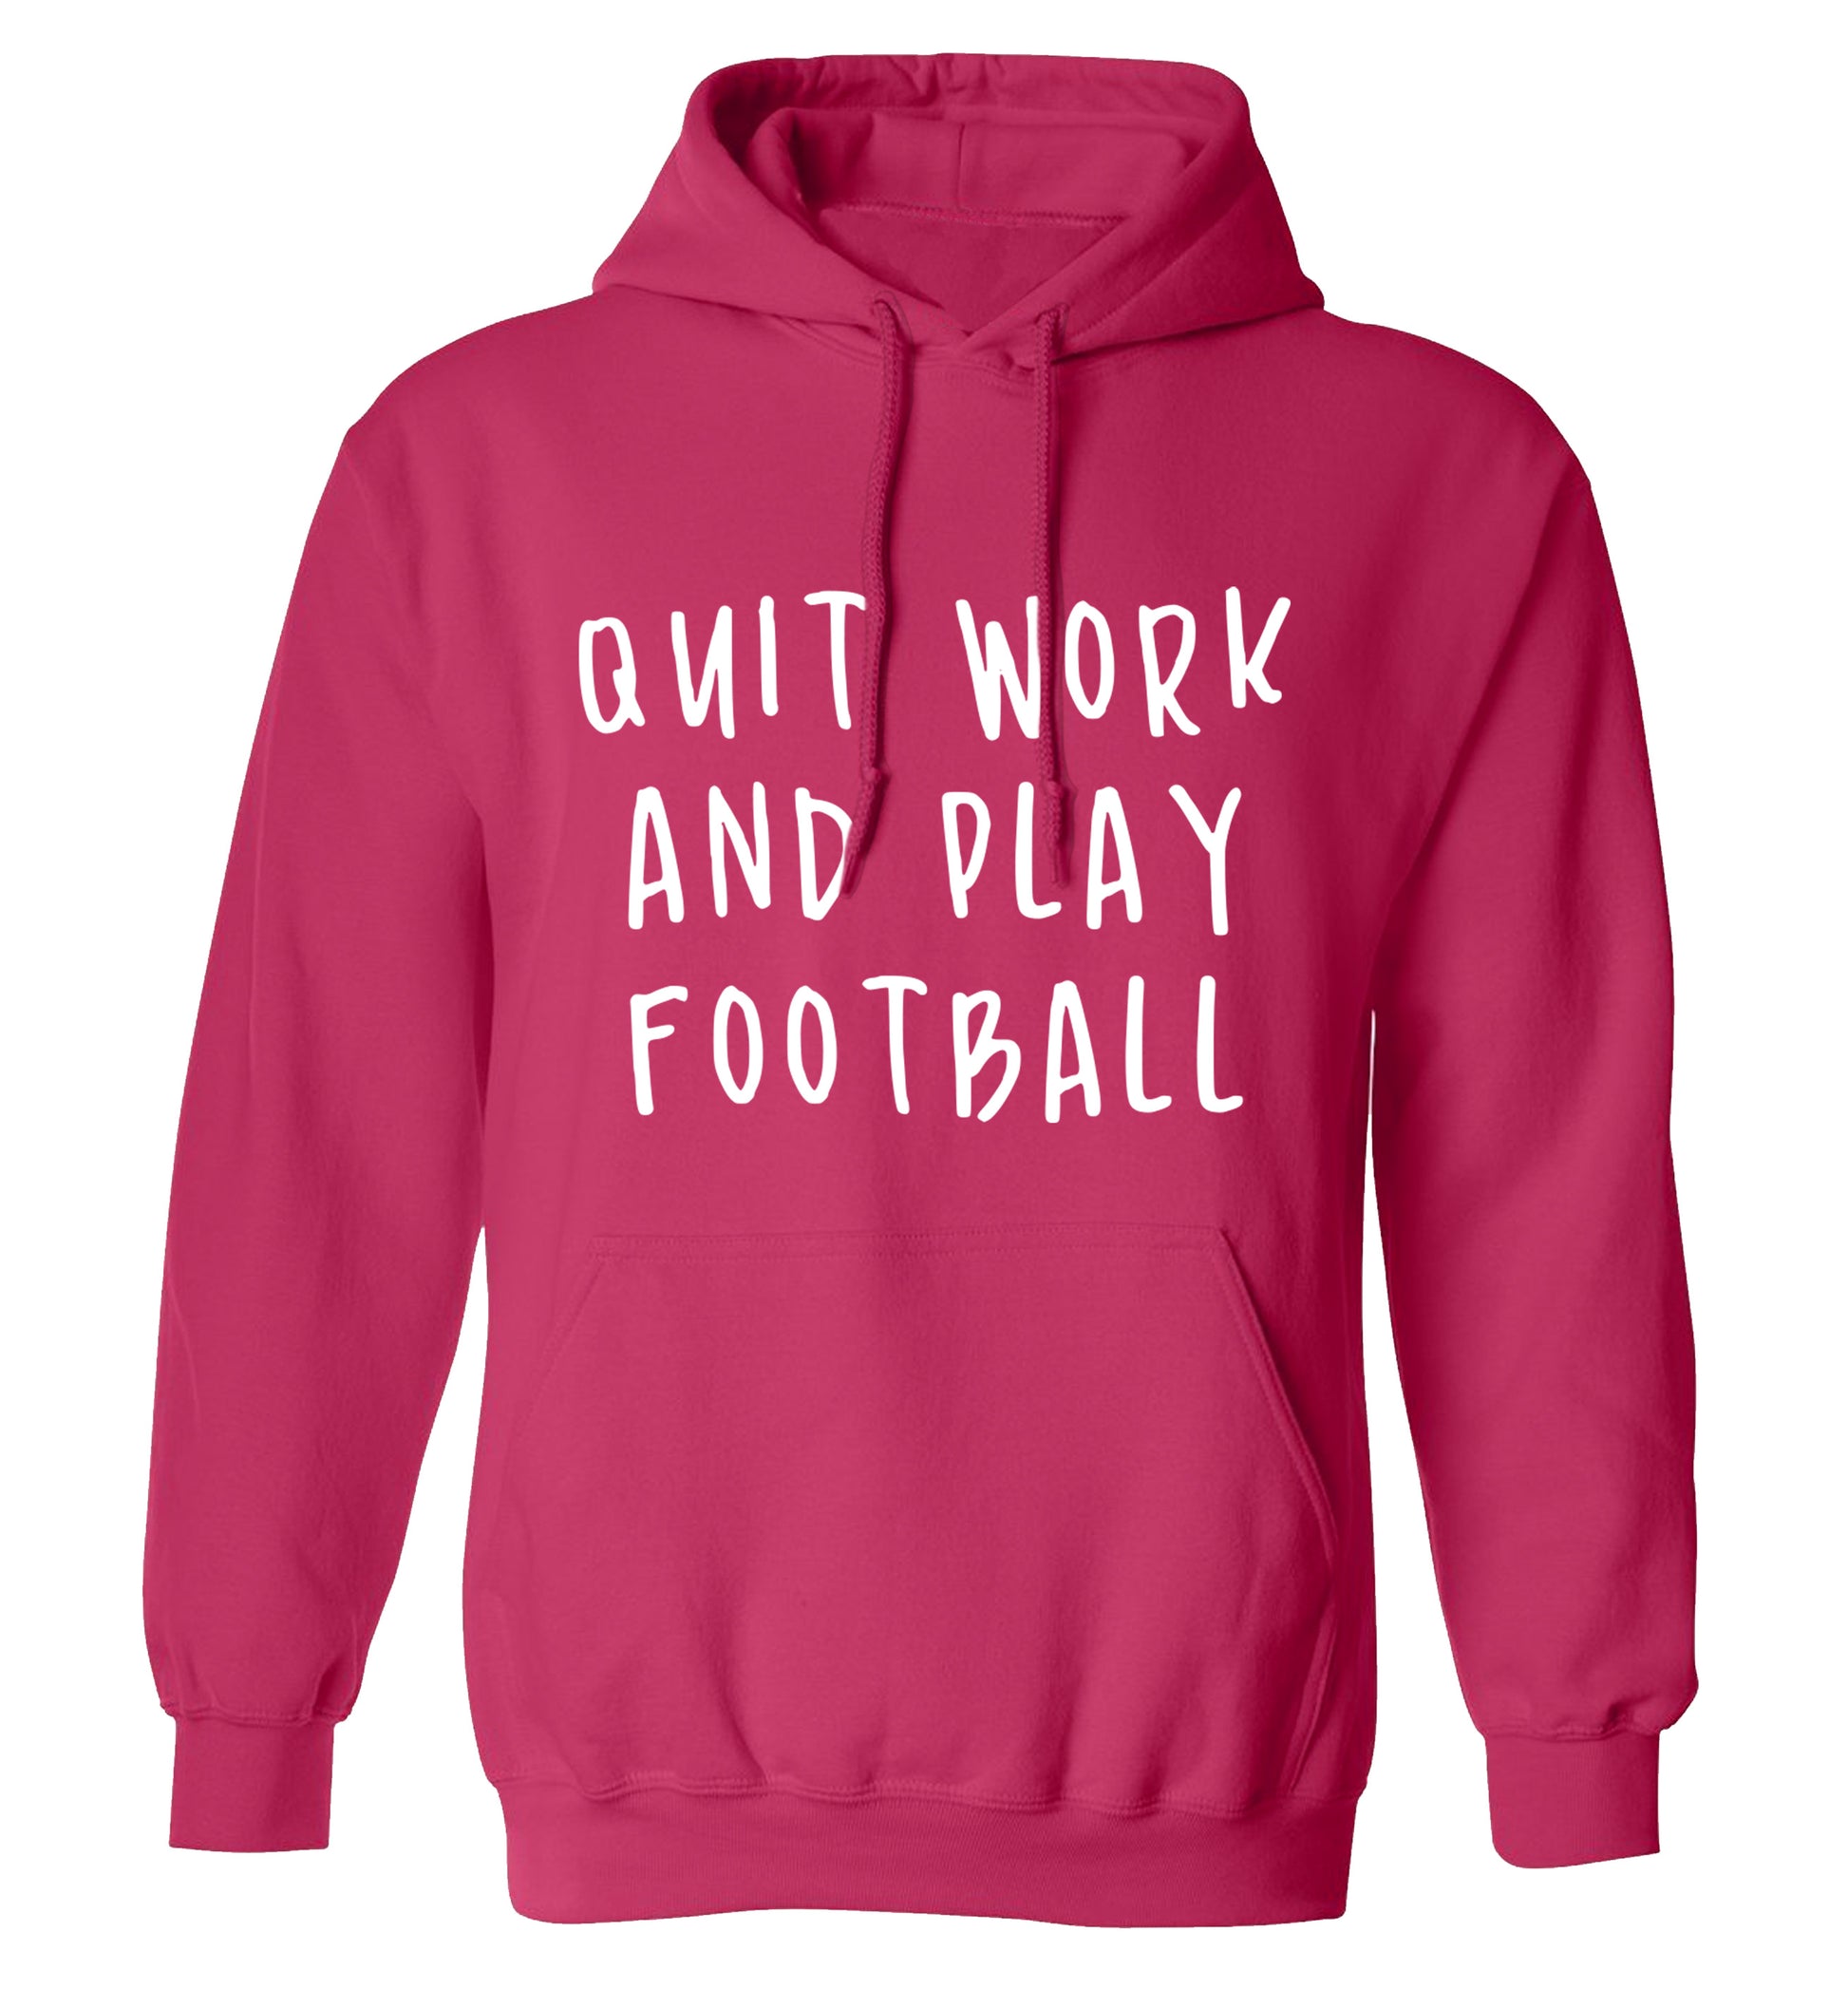 Quit work play football adults unisexpink hoodie 2XL